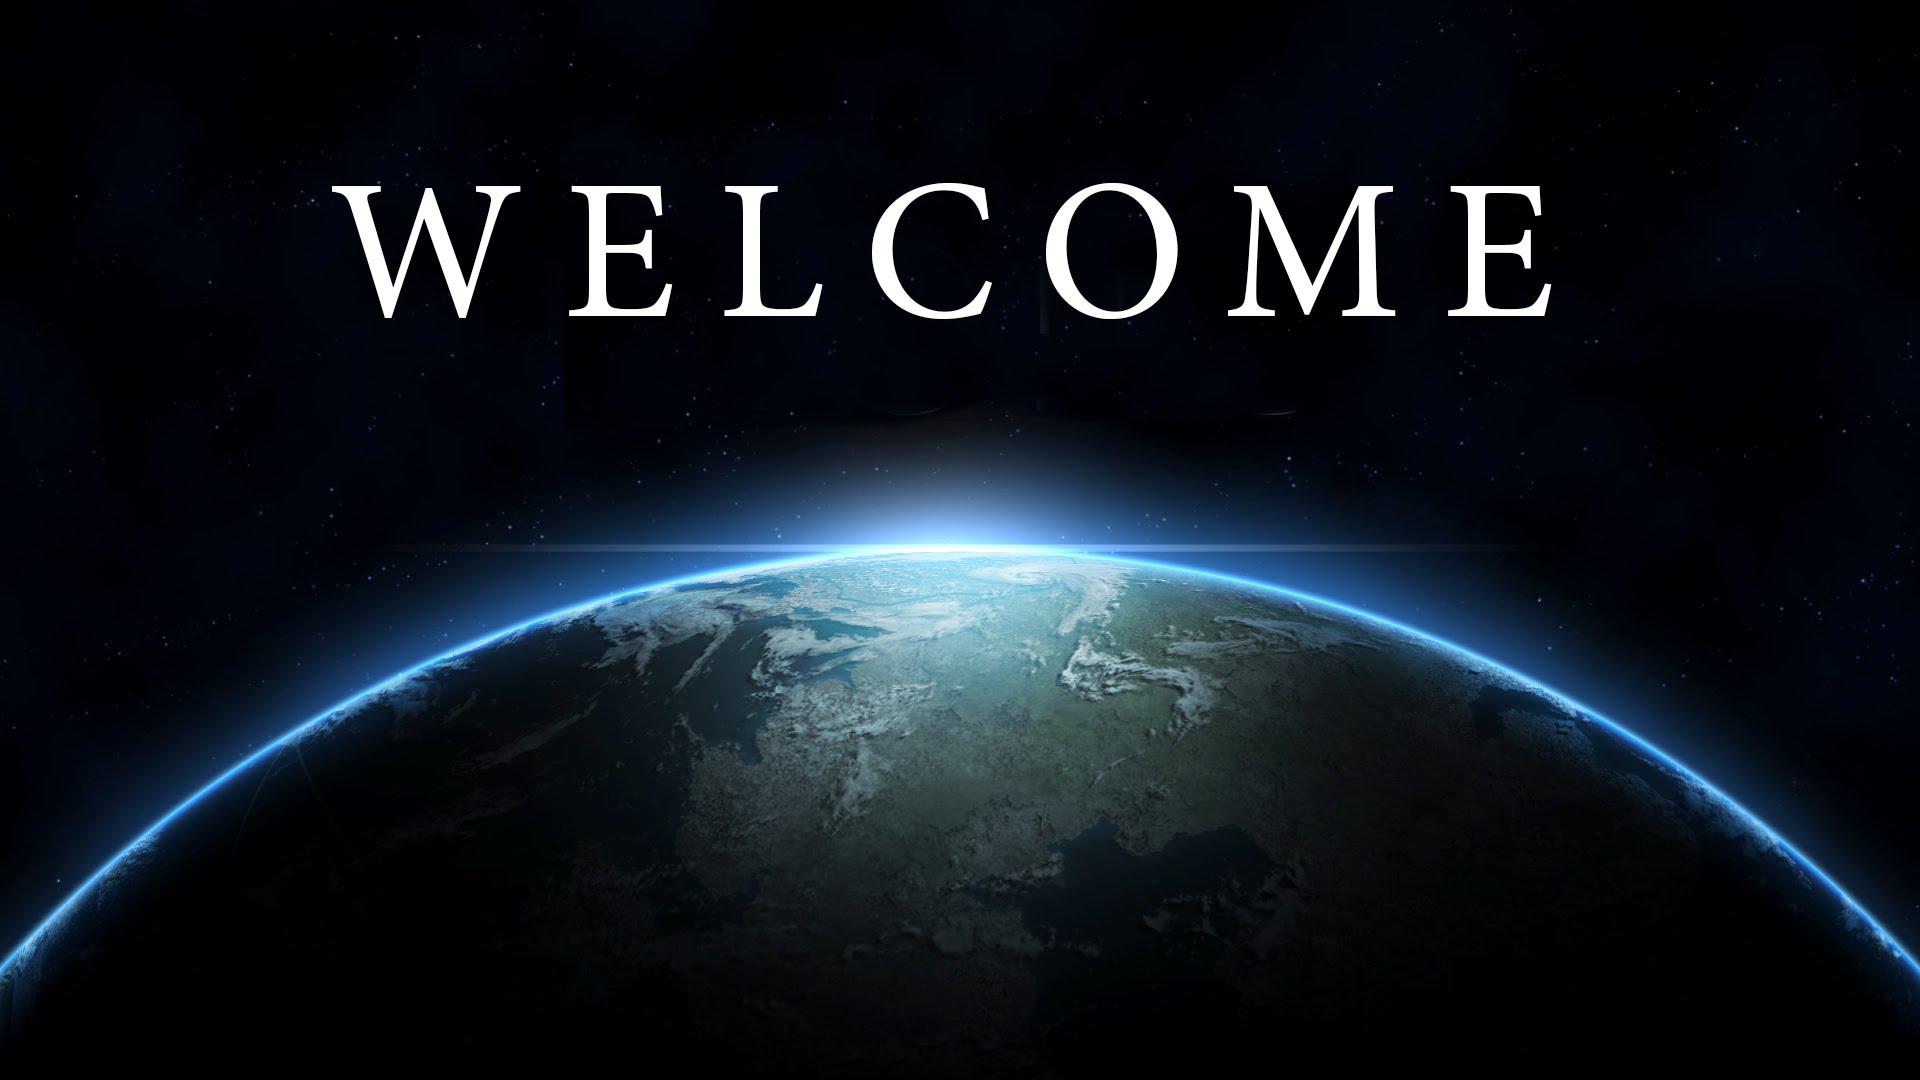 Welcome the coming